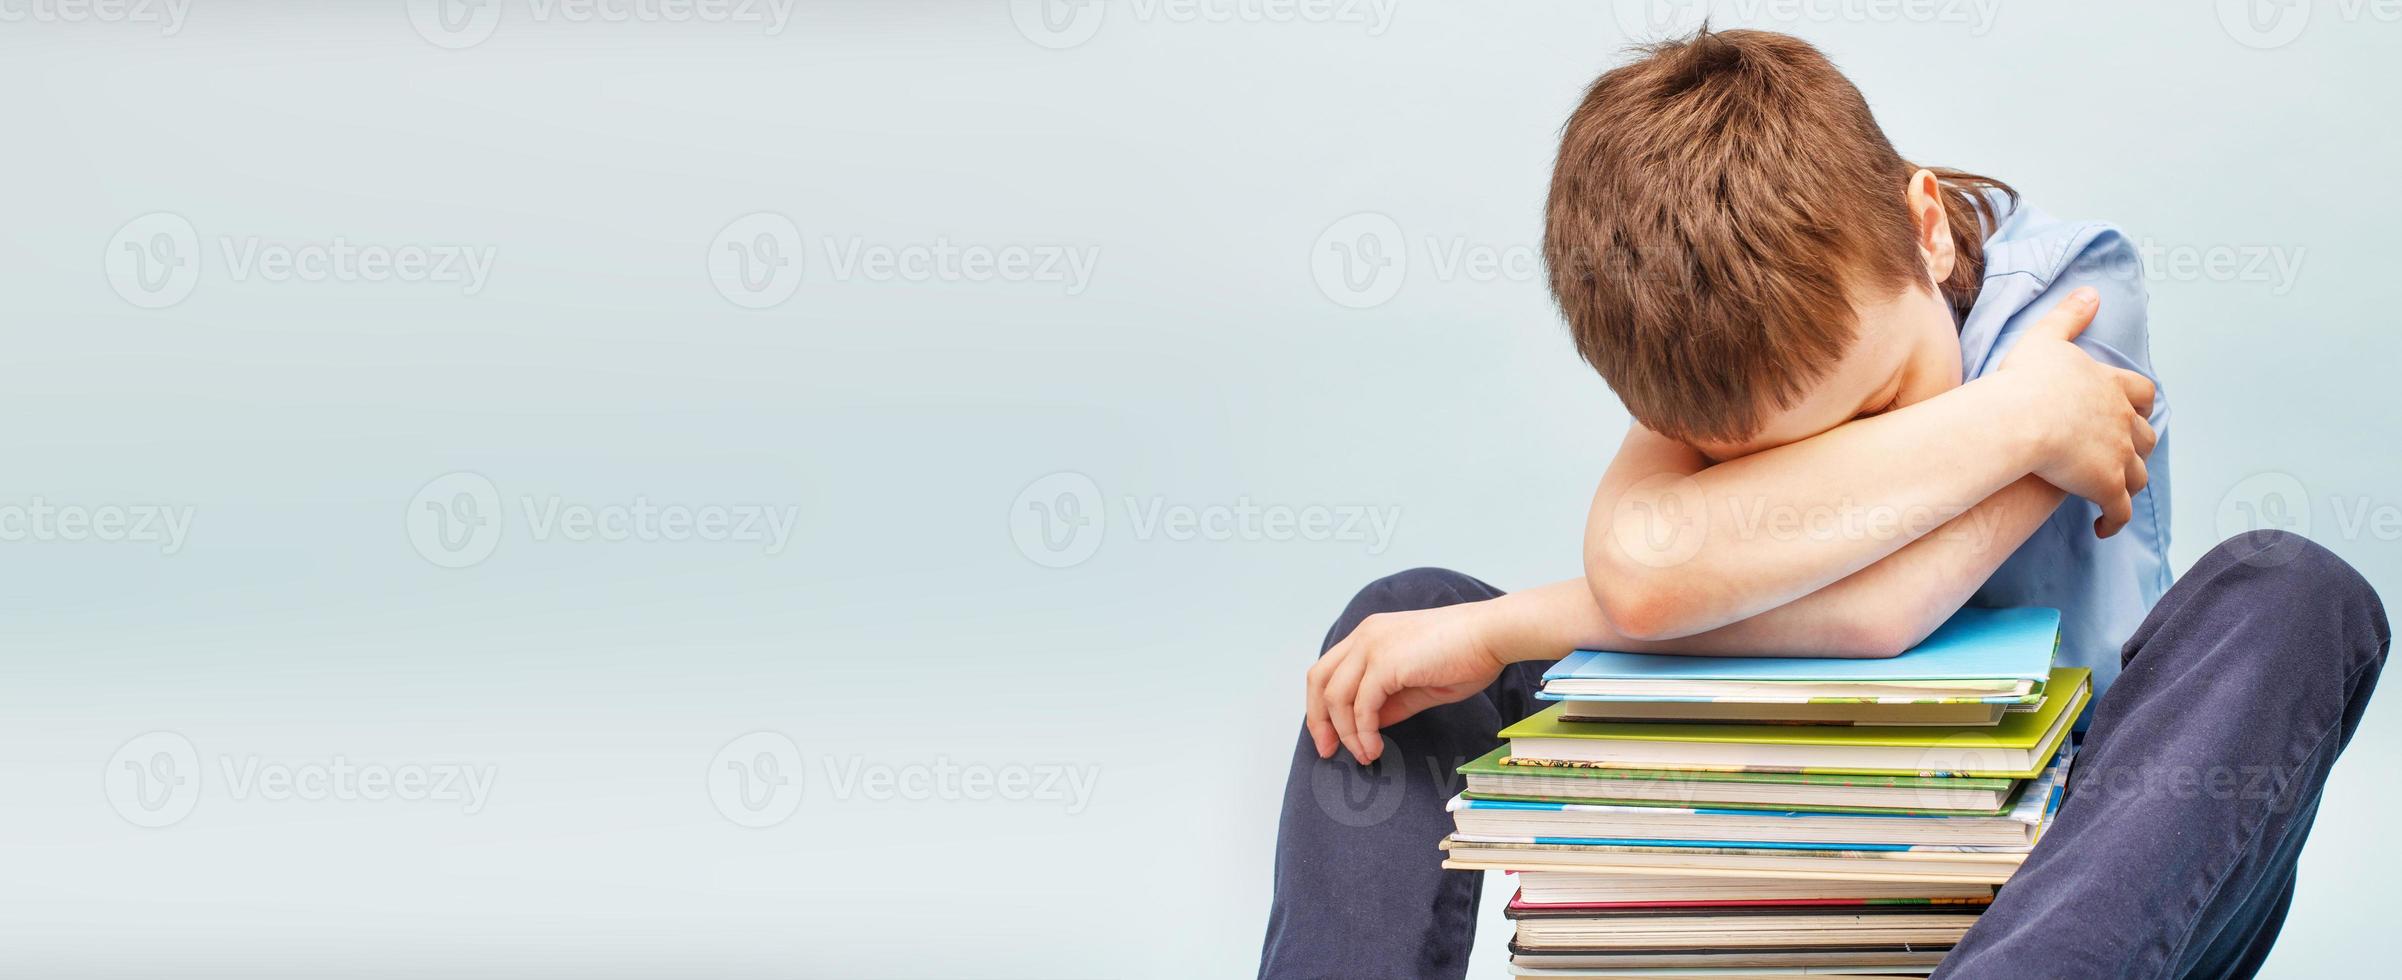 Upset schoolboy sitting with pile of school books and covers his face with hands. boy sleeping on a stack of textbooks photo